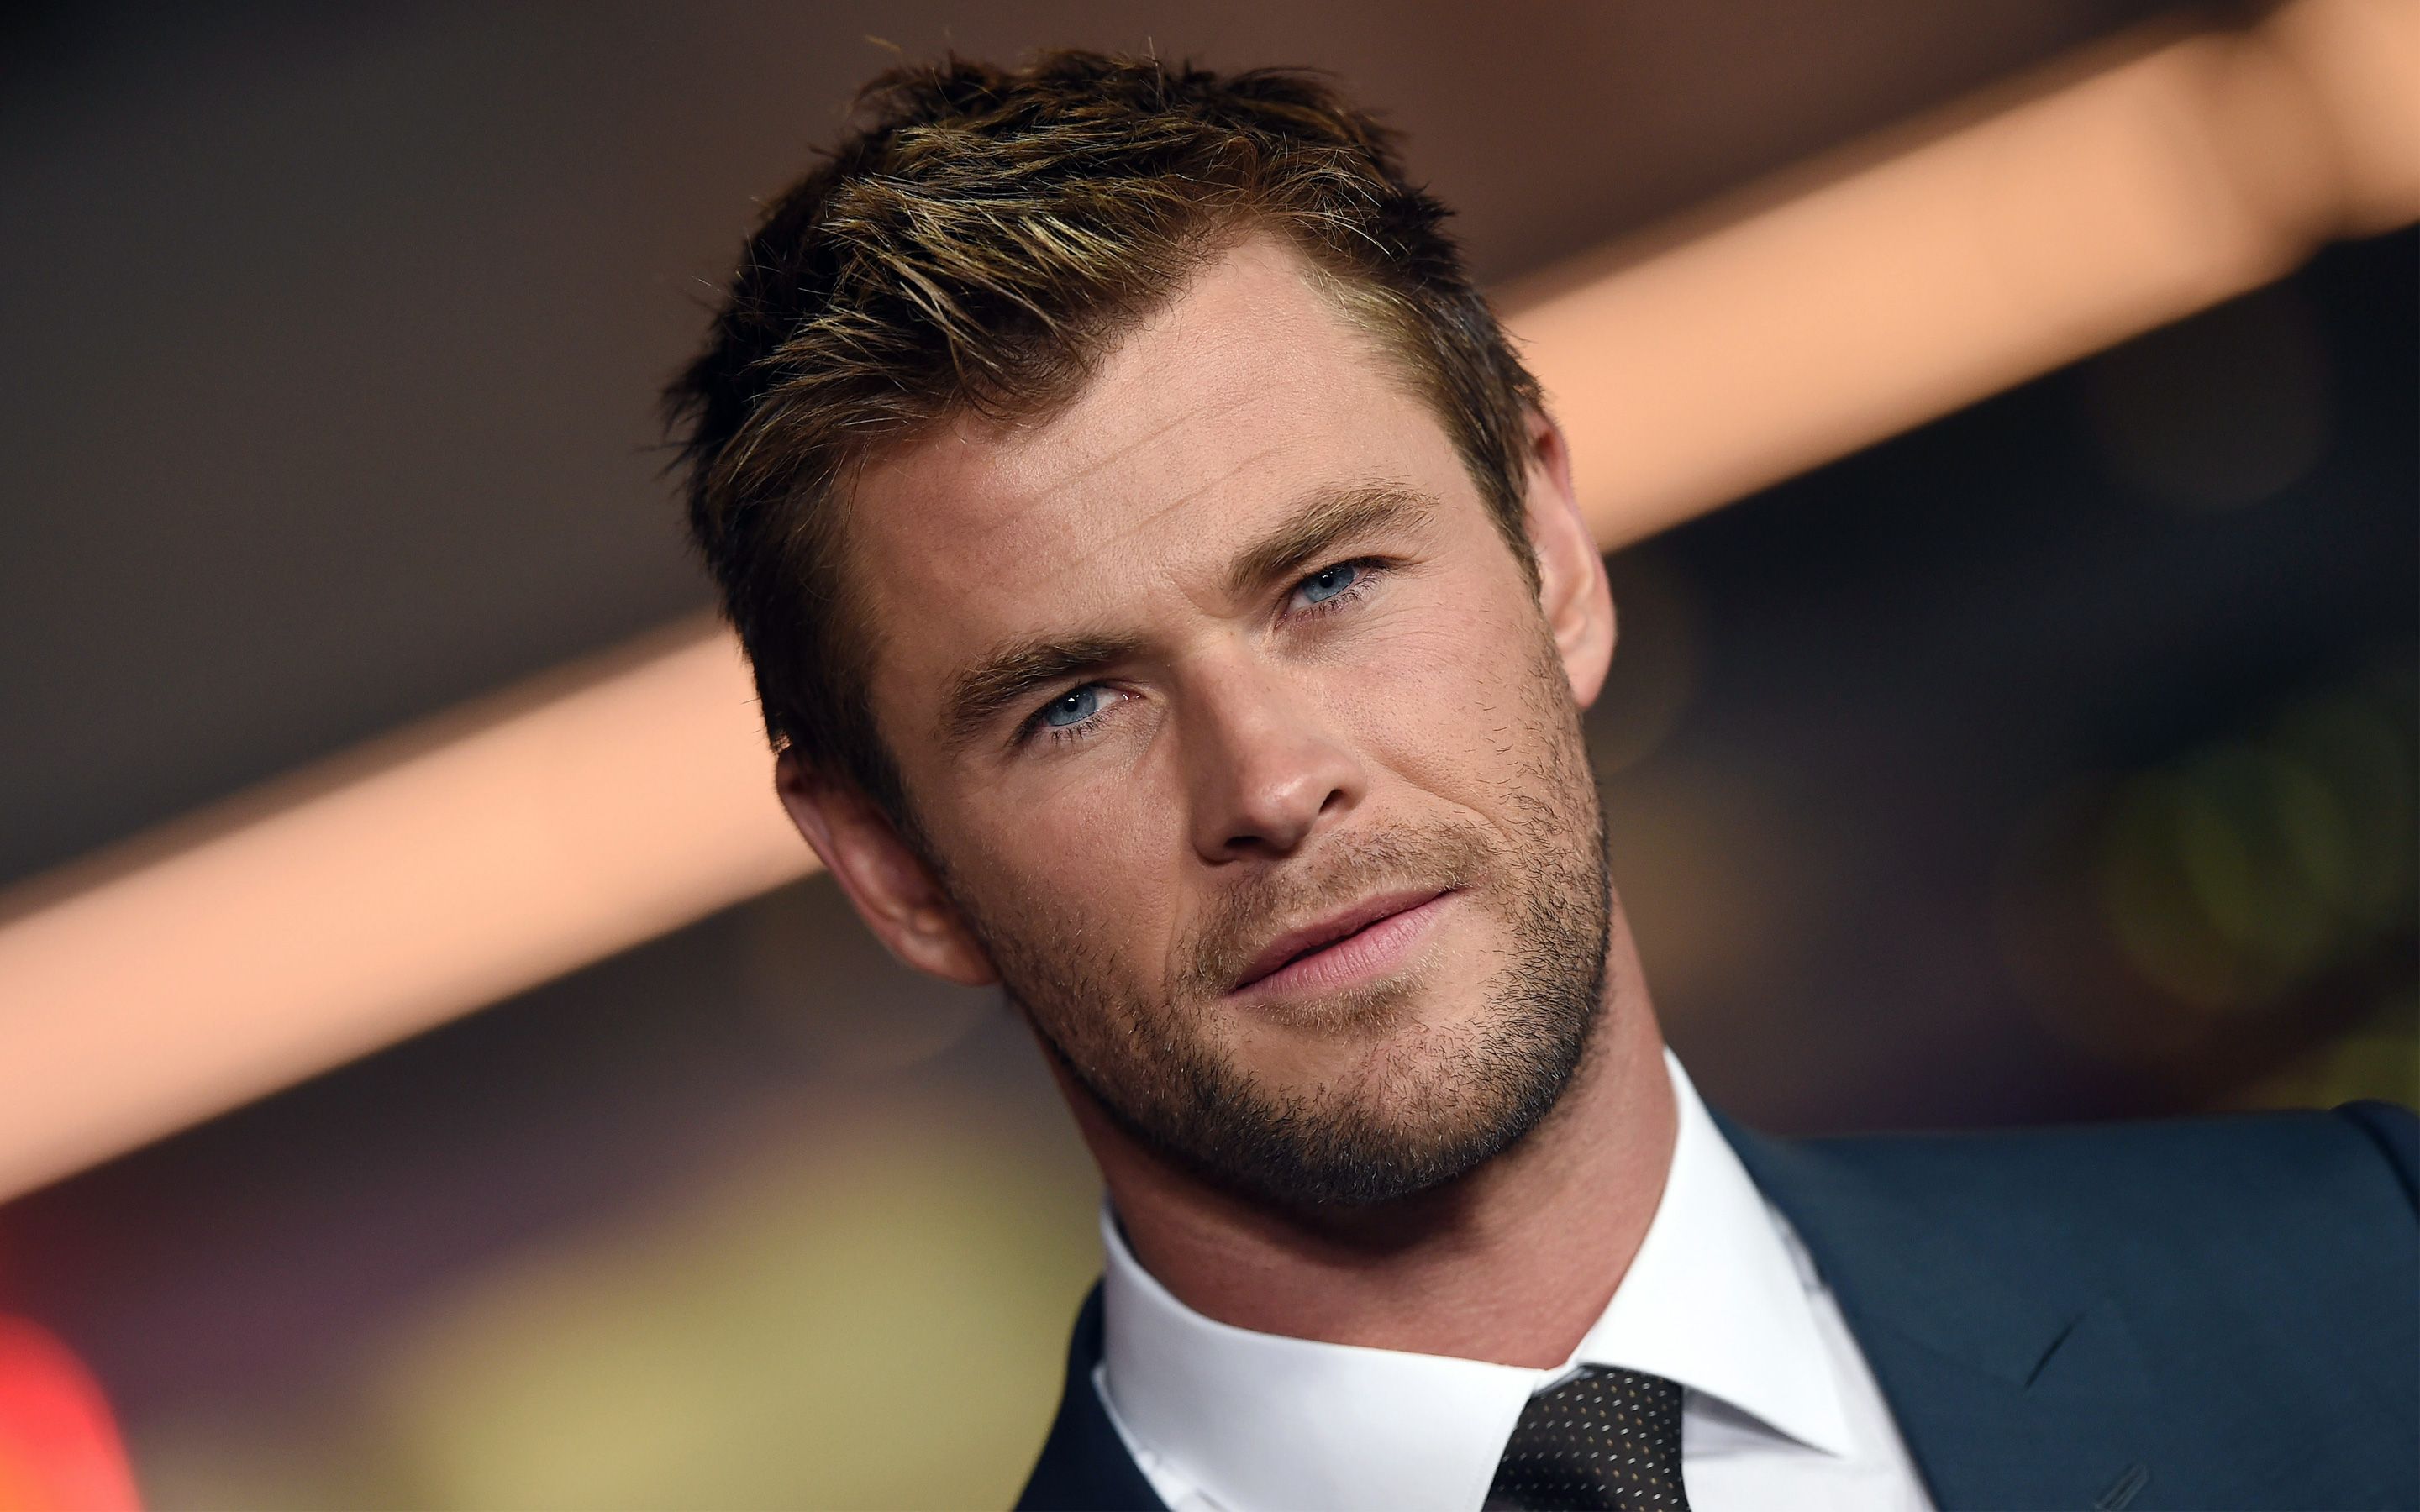 Hemsworth 4K wallpaper for your desktop or mobile screen free and easy to download